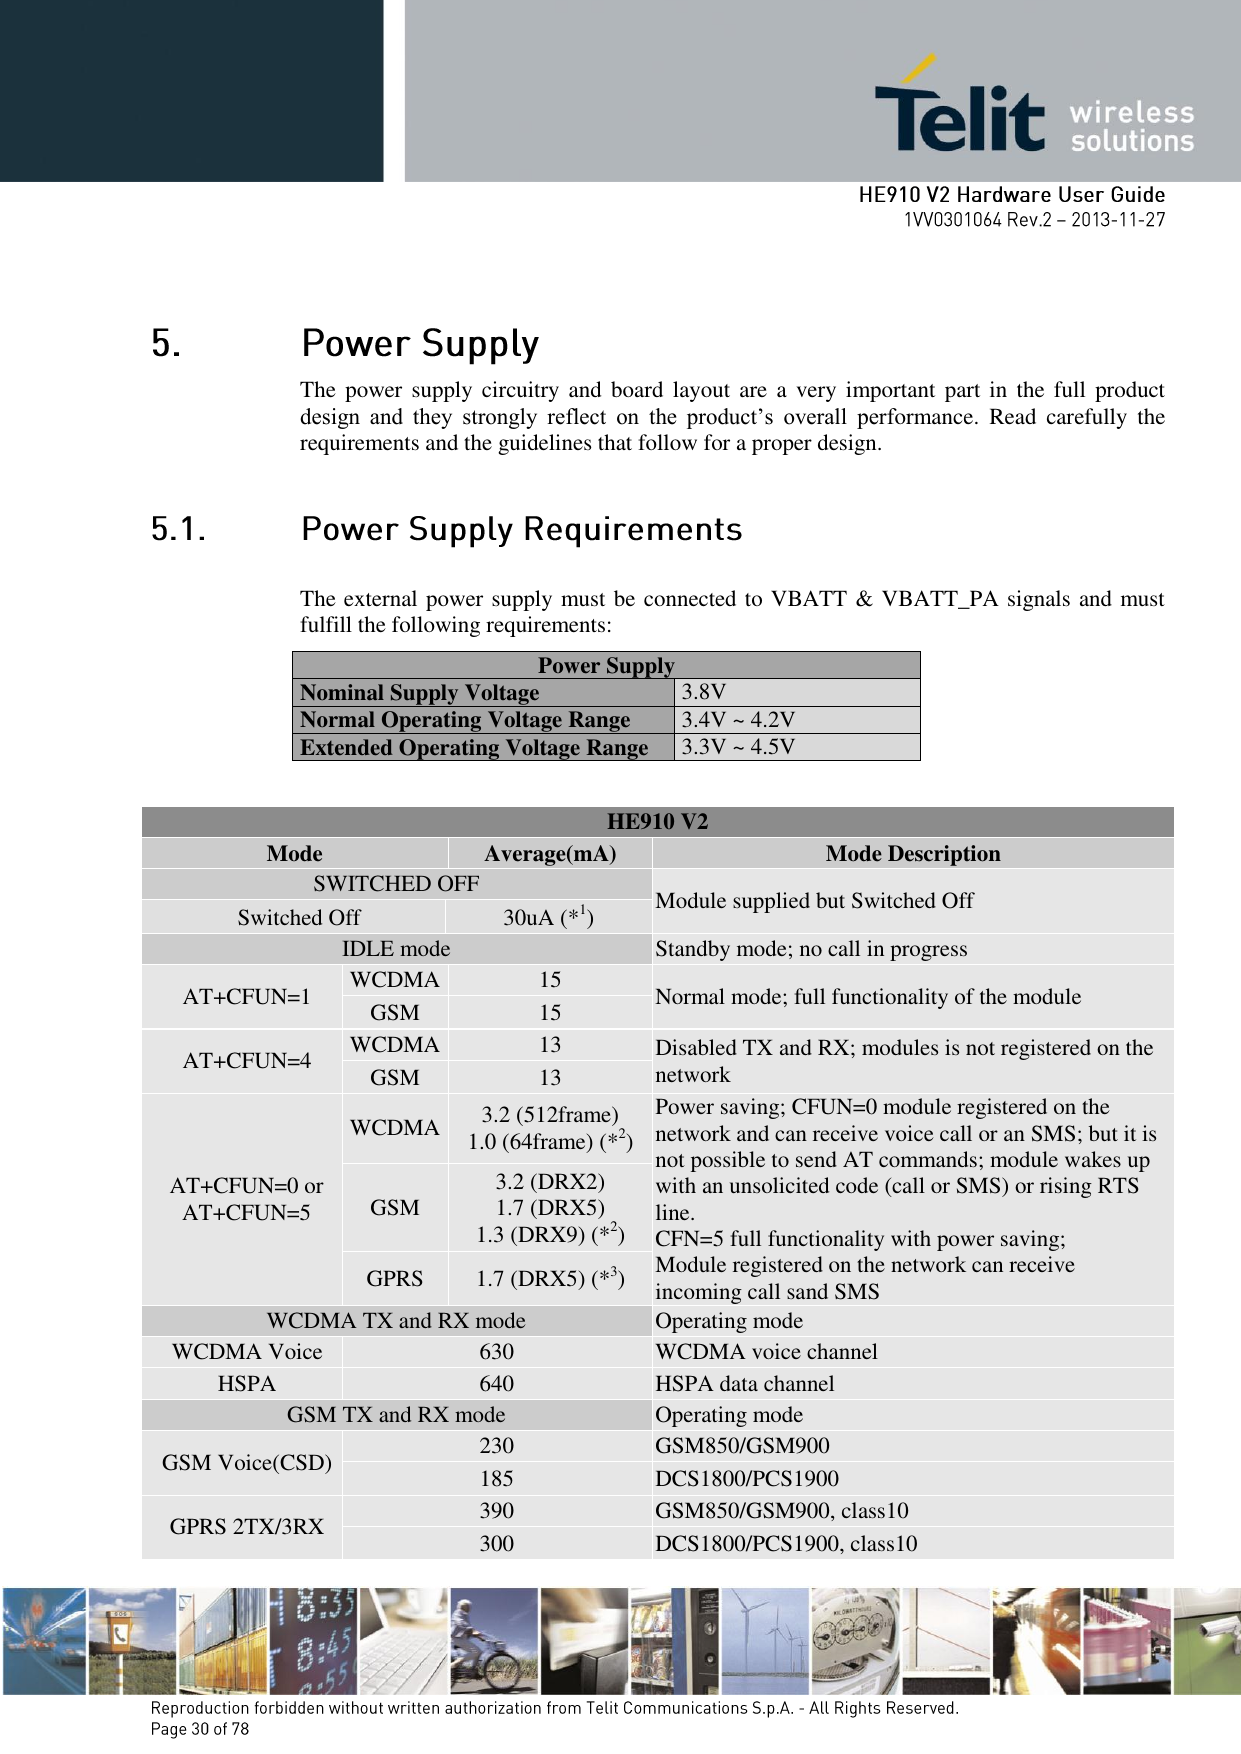        The  power supply circuitry and  board  layout  are  a  very important  part in  the  full  product design  and  they  strongly  reflect  on  the  product’s  overall  performance.  Read  carefully  the requirements and the guidelines that follow for a proper design.  The external power supply must be connected to VBATT &amp; VBATT_PA signals and must fulfill the following requirements: Power Supply Nominal Supply Voltage 3.8V Normal Operating Voltage Range 3.4V ~ 4.2V Extended Operating Voltage Range 3.3V ~ 4.5V  HE910 V2 Mode Average(mA) Mode Description SWITCHED OFF Module supplied but Switched Off Switched Off 30uA (*1) IDLE mode Standby mode; no call in progress AT+CFUN=1 WCDMA 15 Normal mode; full functionality of the module GSM 15 AT+CFUN=4 WCDMA 13 Disabled TX and RX; modules is not registered on the network GSM 13 AT+CFUN=0 or AT+CFUN=5 WCDMA 3.2 (512frame) 1.0 (64frame) (*2) Power saving; CFUN=0 module registered on the network and can receive voice call or an SMS; but it is not possible to send AT commands; module wakes up with an unsolicited code (call or SMS) or rising RTS line. CFN=5 full functionality with power saving; Module registered on the network can receive  incoming call sand SMS GSM 3.2 (DRX2) 1.7 (DRX5) 1.3 (DRX9) (*2) GPRS 1.7 (DRX5) (*3) WCDMA TX and RX mode Operating mode WCDMA Voice 630 WCDMA voice channel HSPA 640 HSPA data channel  GSM TX and RX mode Operating mode GSM Voice(CSD) 230 GSM850/GSM900 185 DCS1800/PCS1900 GPRS 2TX/3RX 390 GSM850/GSM900, class10 300 DCS1800/PCS1900, class10 